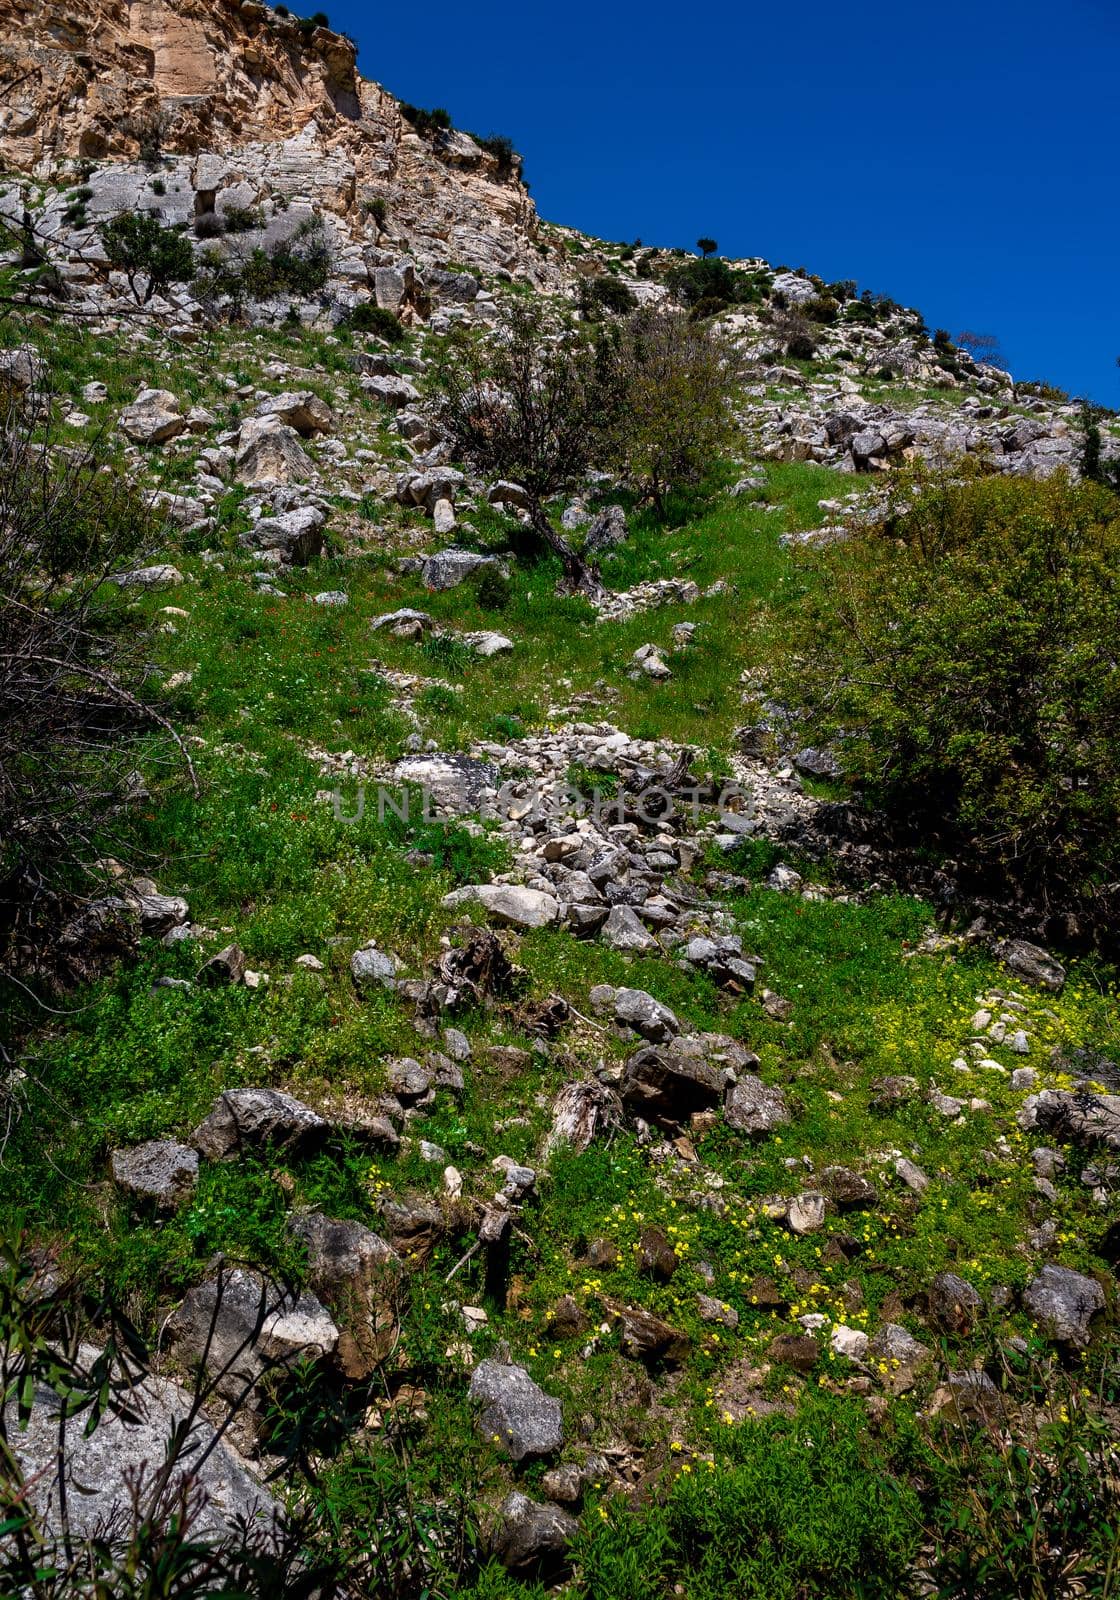 Stones on the slopes of the Avakas mountain gorge on the island of Cyprus.